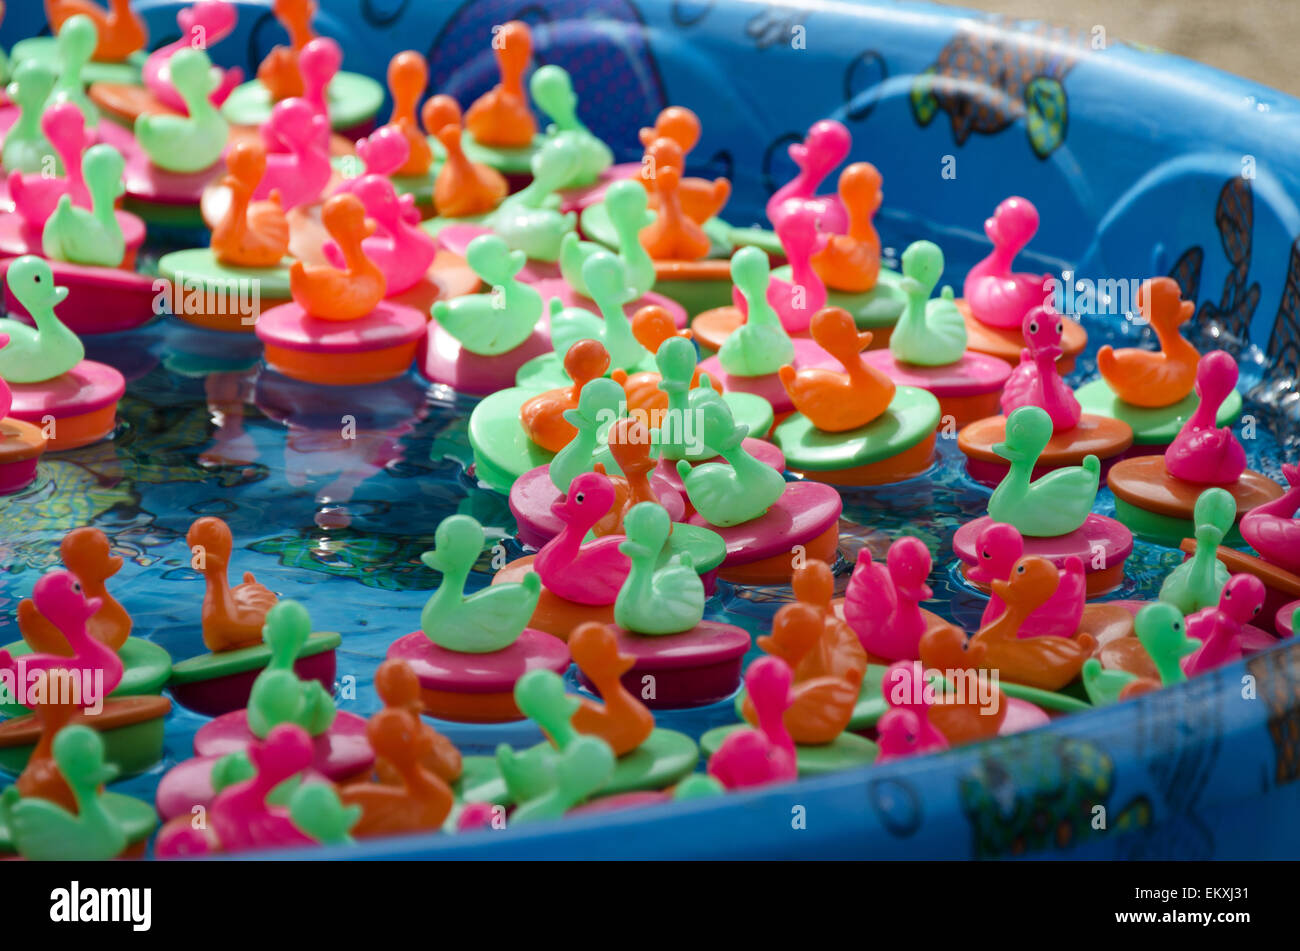 A ring-toss game at a carnival midway floats rubber ducks in a wading pool. Stock Photo